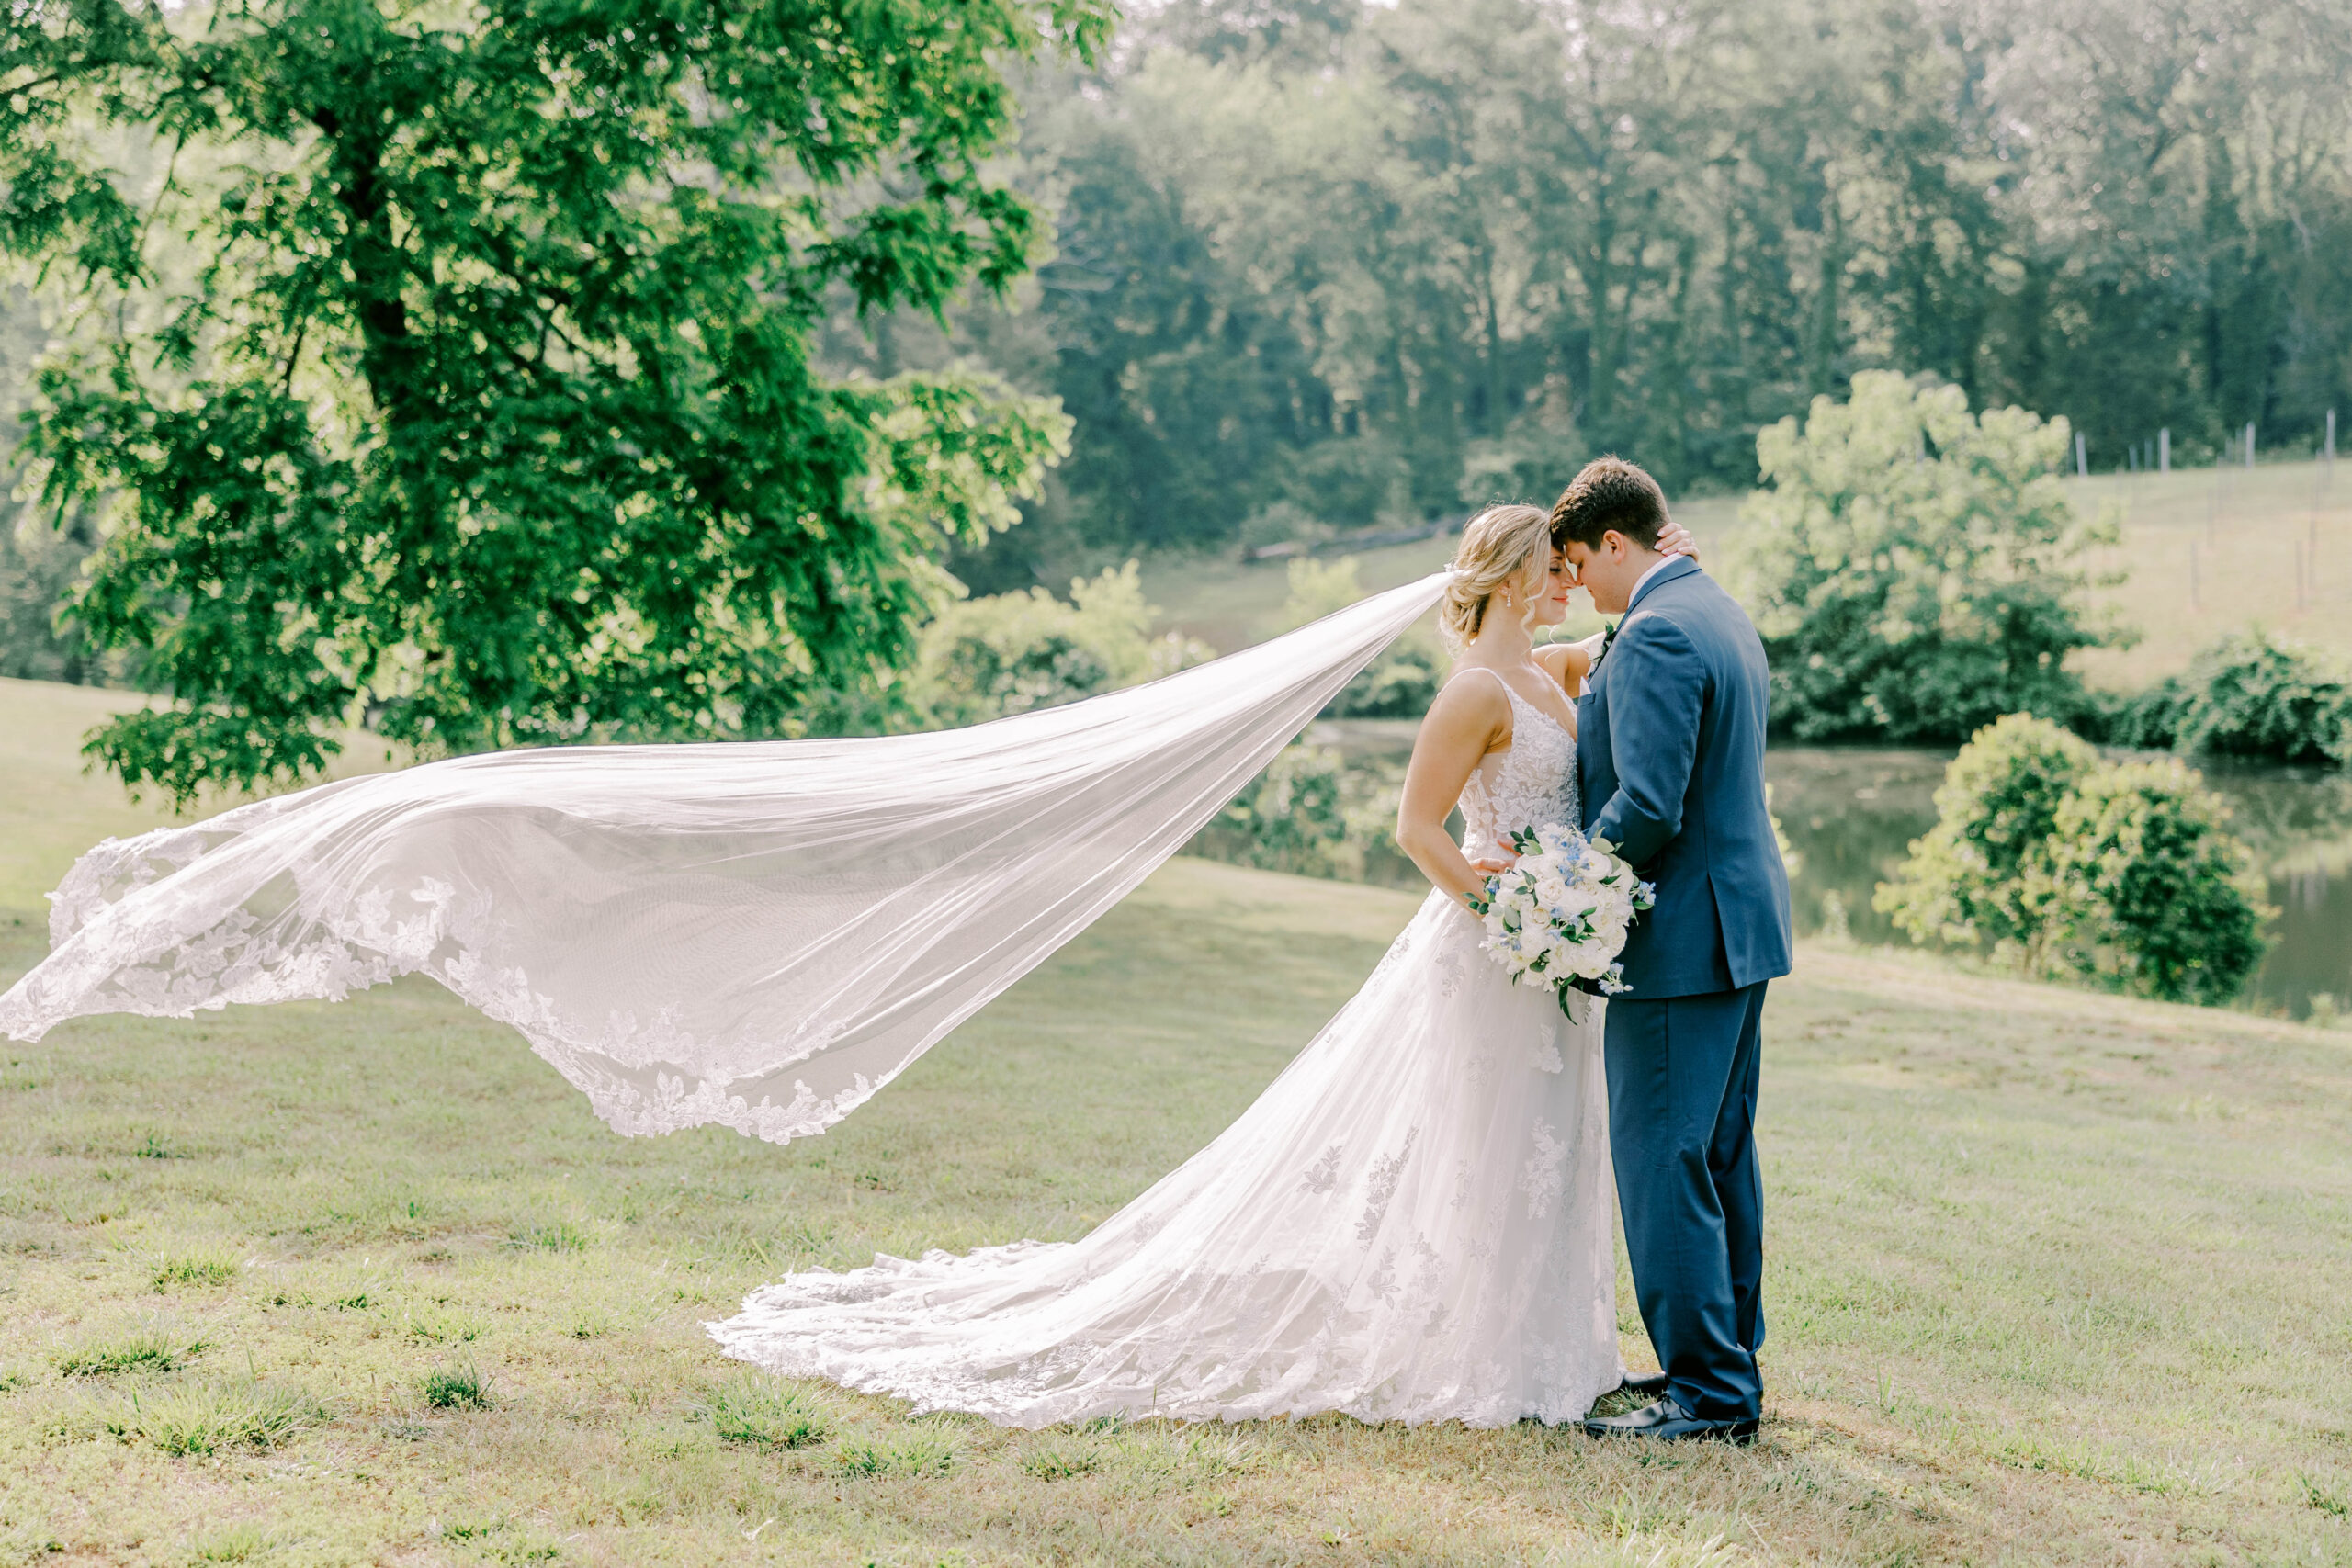 Poplar Springs Manor bride and groom with a veil blowing behind the bride